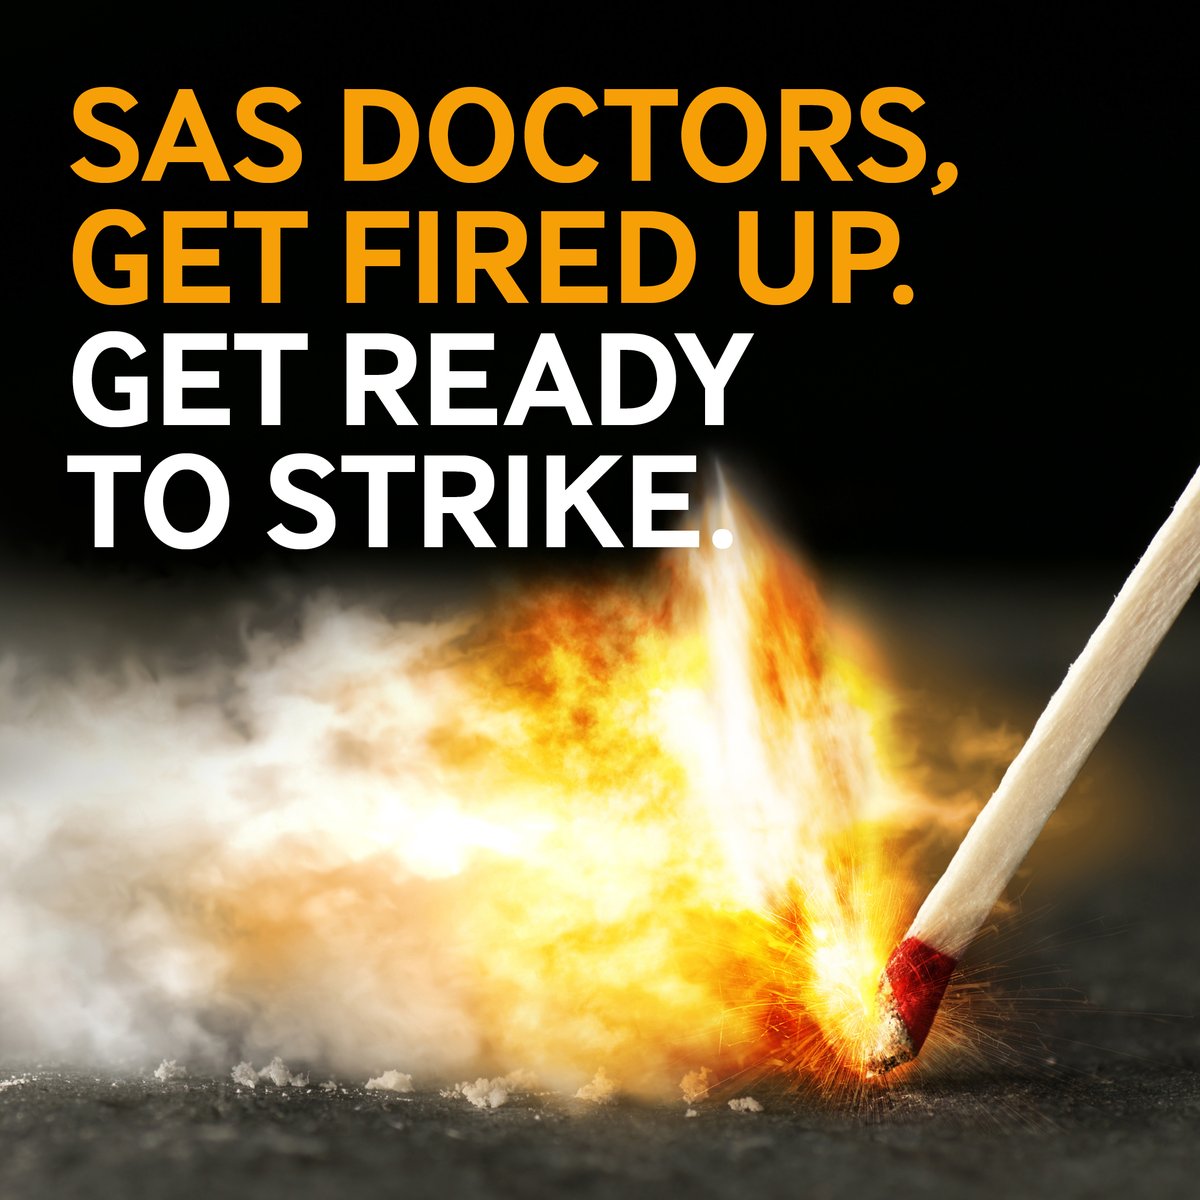 SAS doctors in England: To help get yourself ready to strike, make sure we’re using the right email address & mobile number to contact you so you don’t miss any updates. Log in to your BMA account today and check your membership details are up to date 👇 bma.org.uk/my-bma